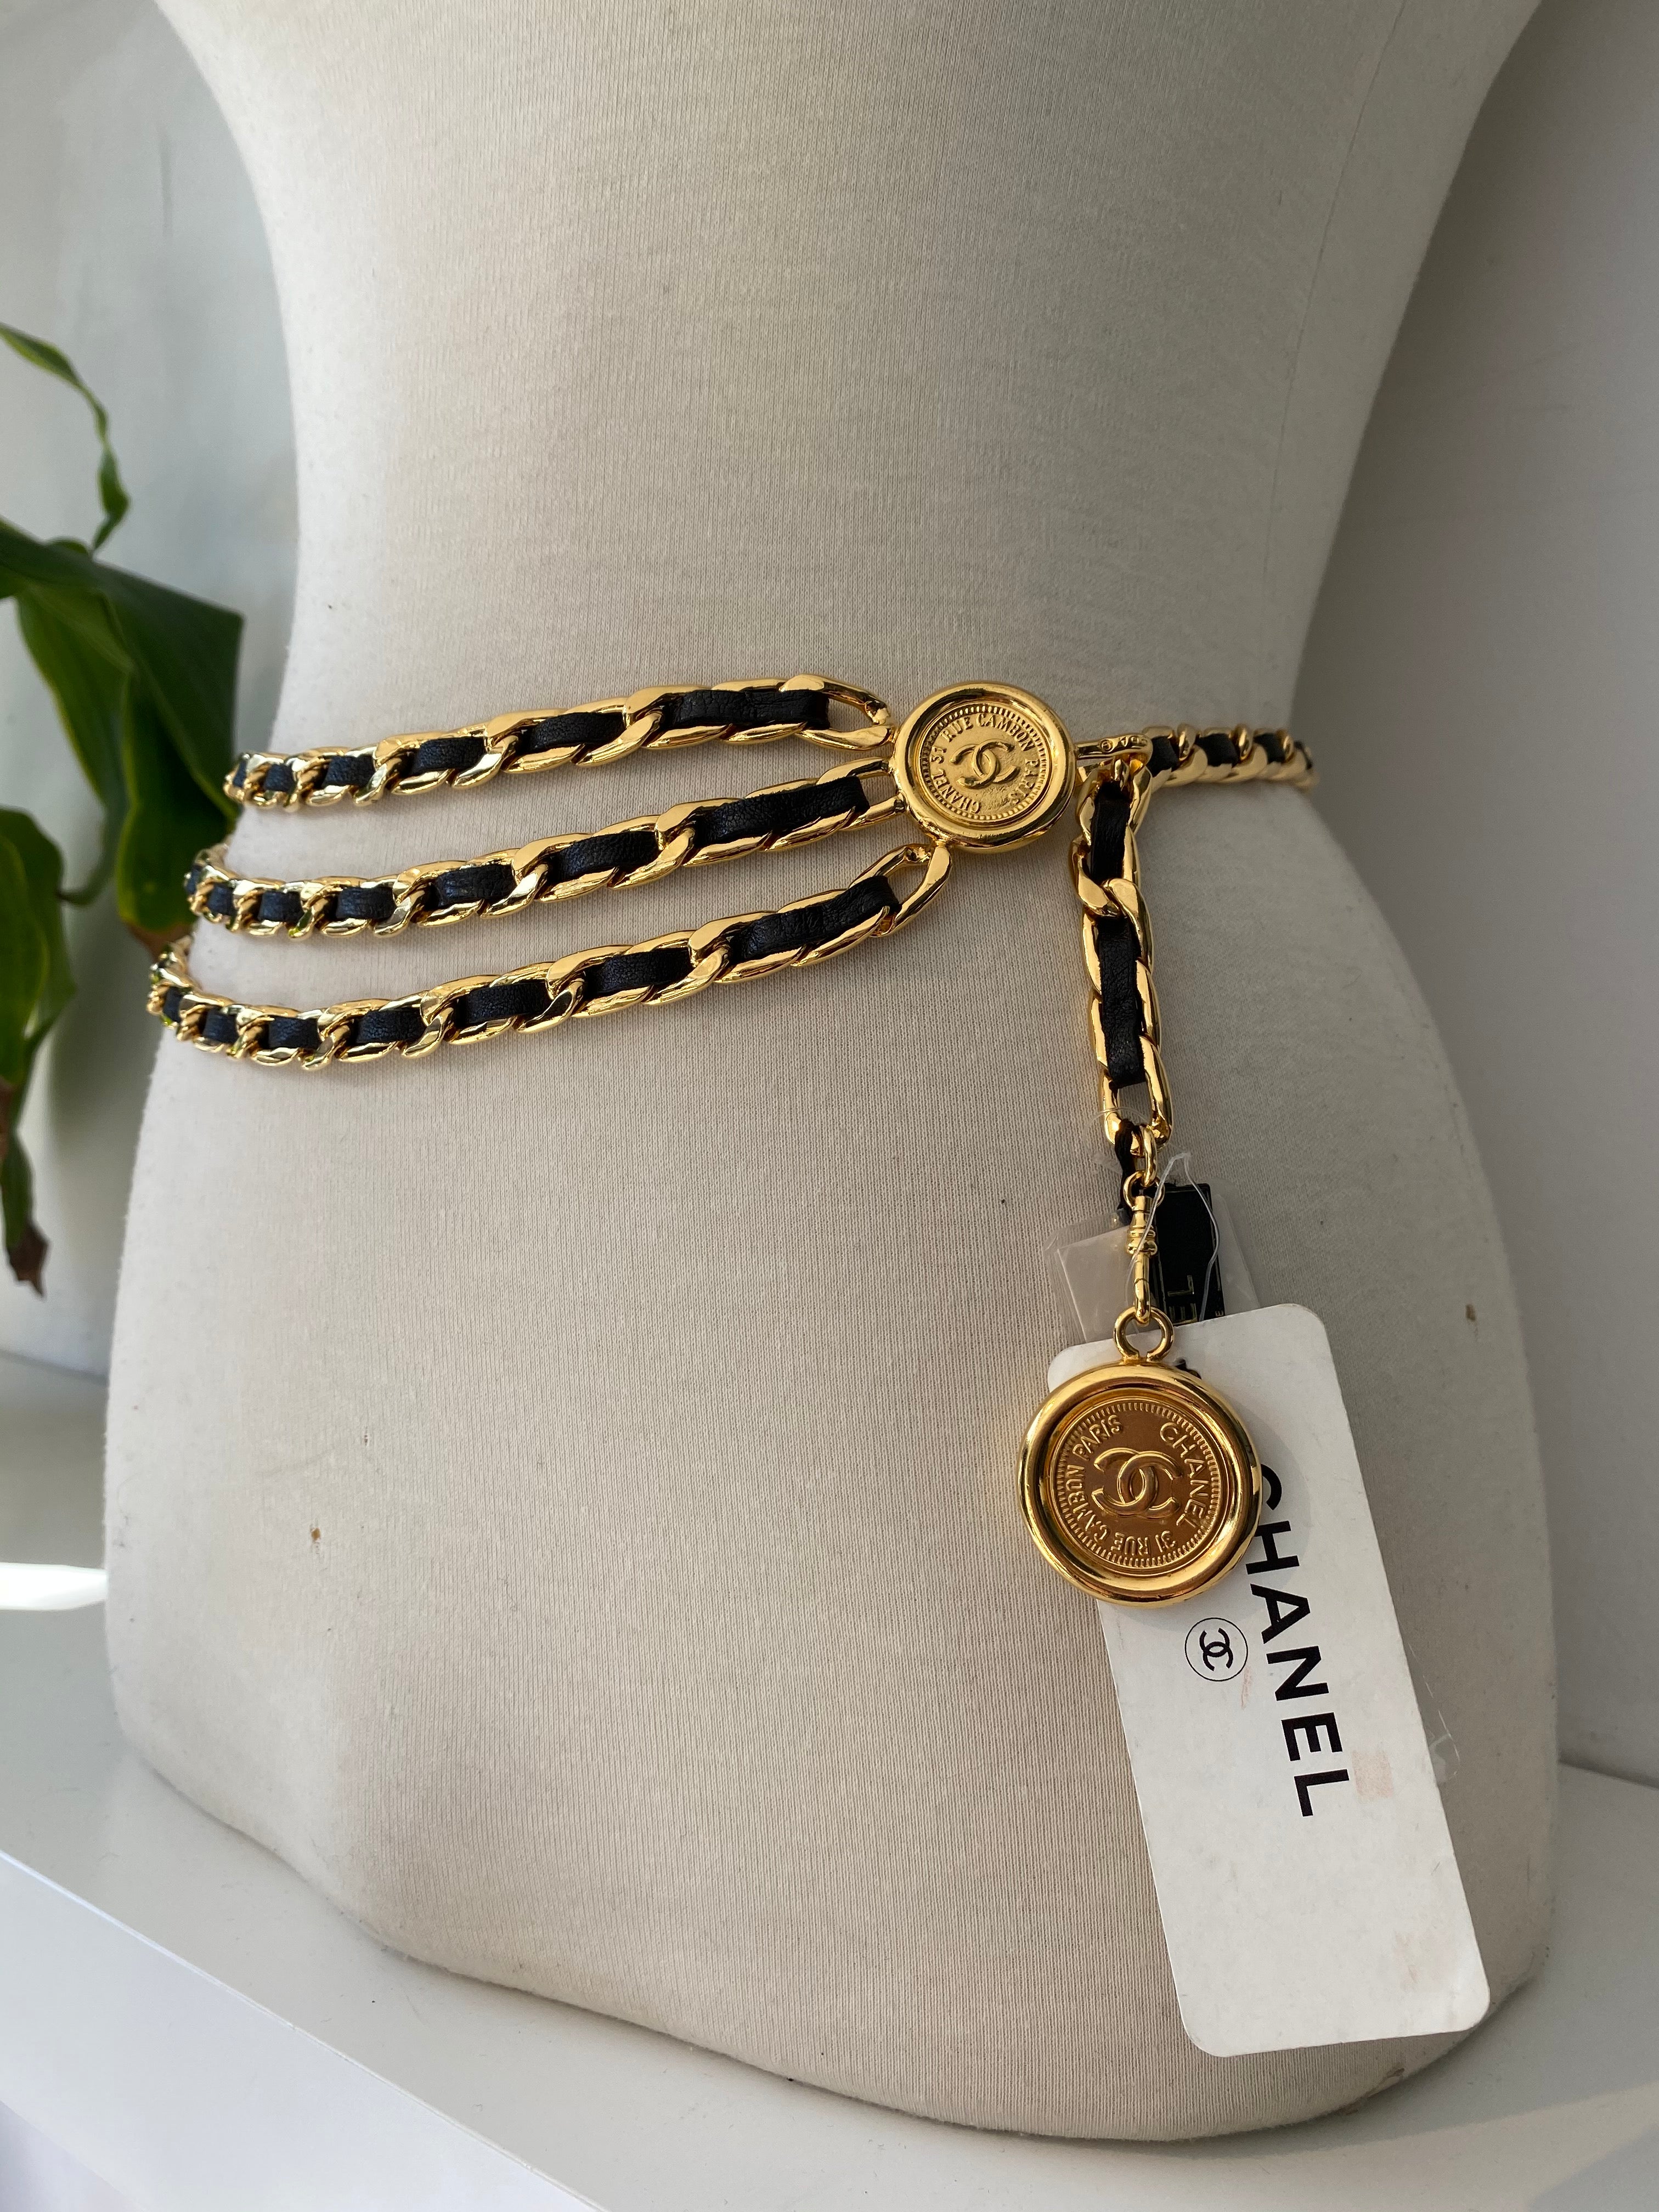 Chanel Vintage Crown and Coco Chanel Medallion Chain Belt